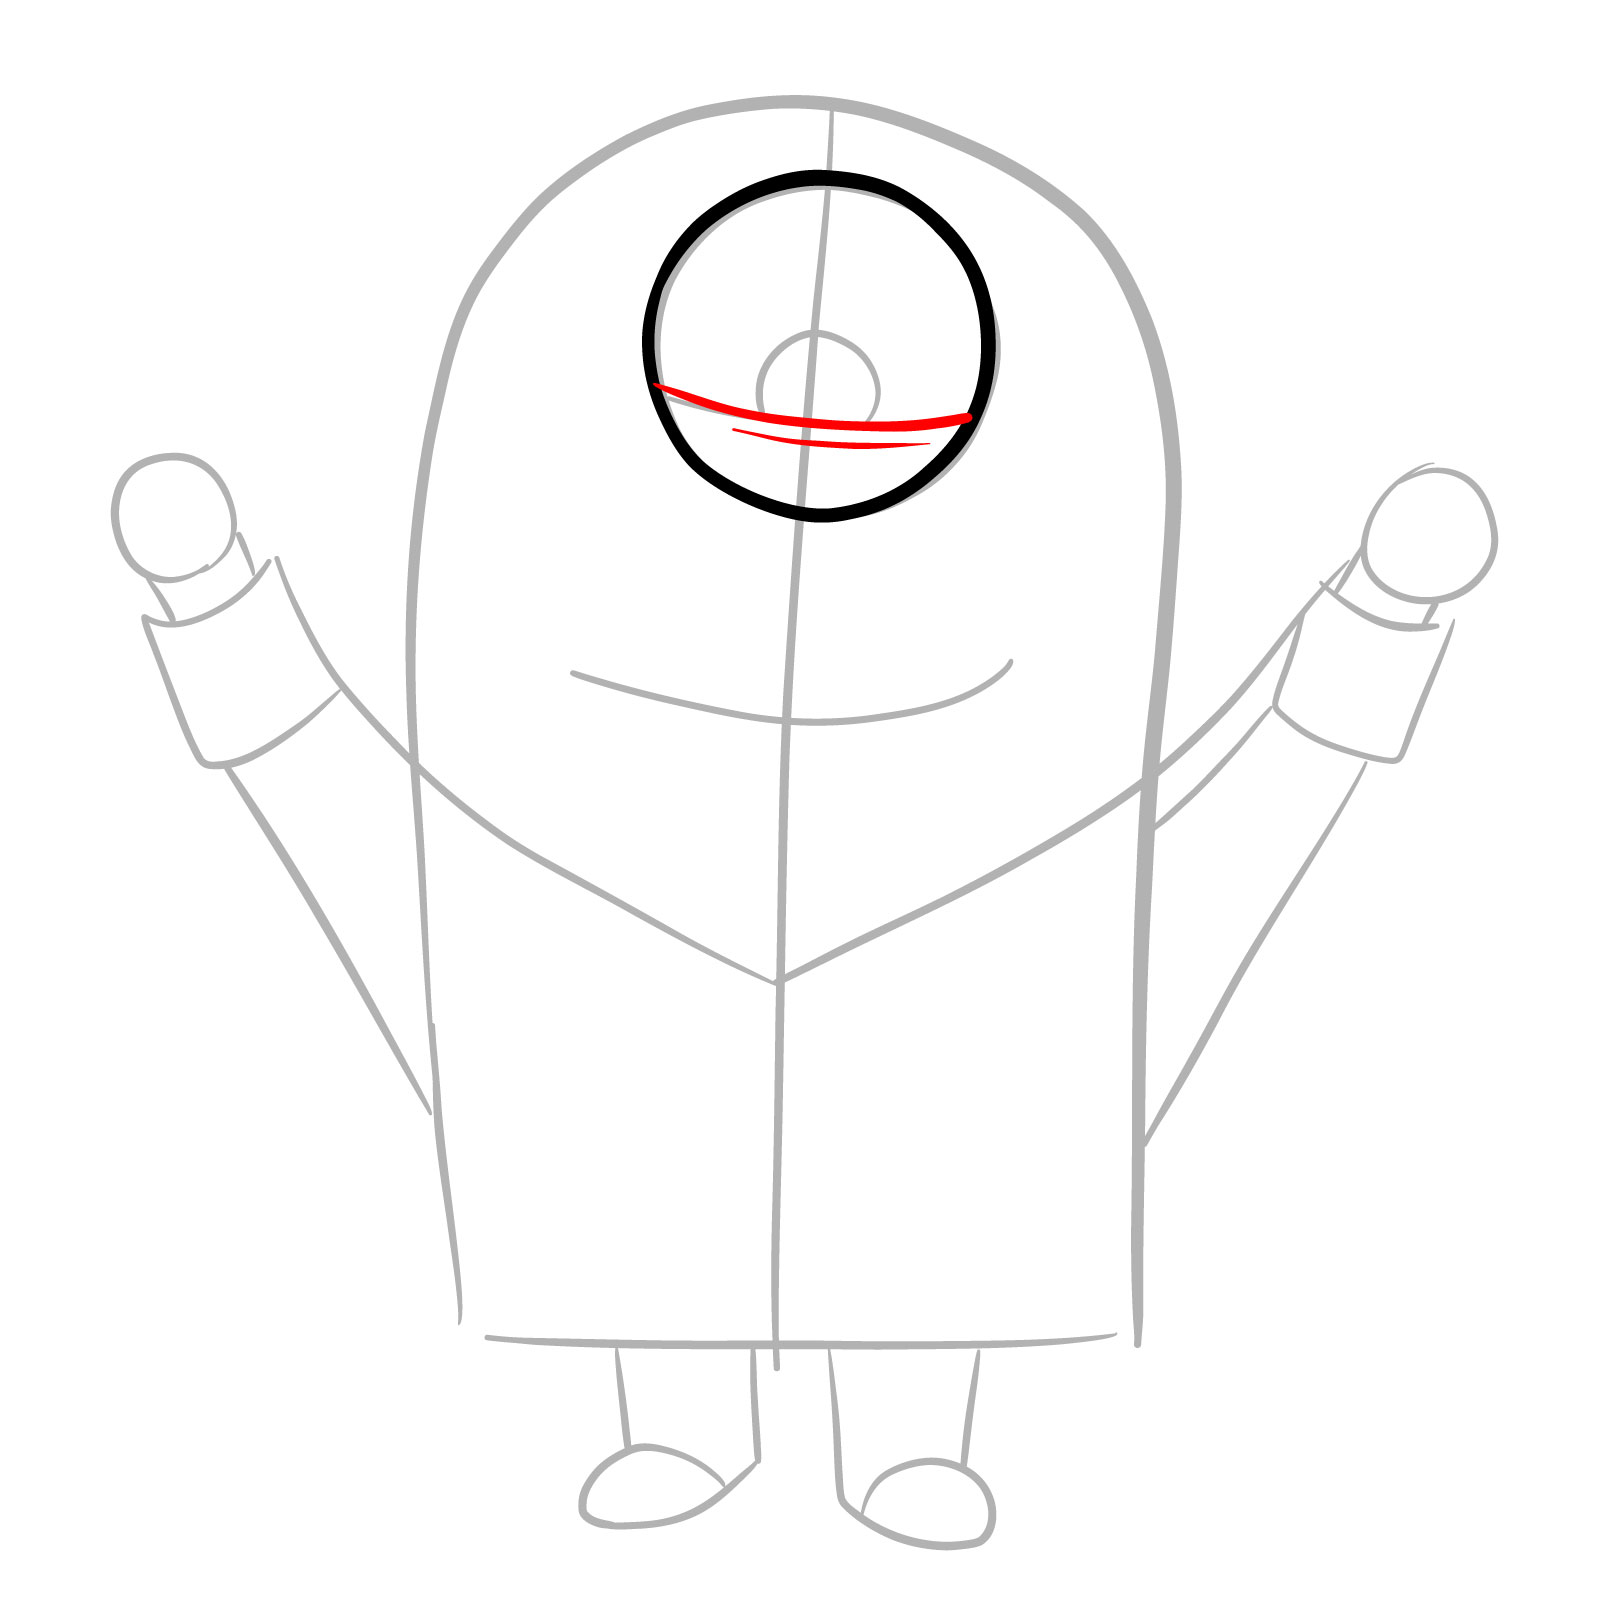 How to Draw a Vampire Minion - step 05